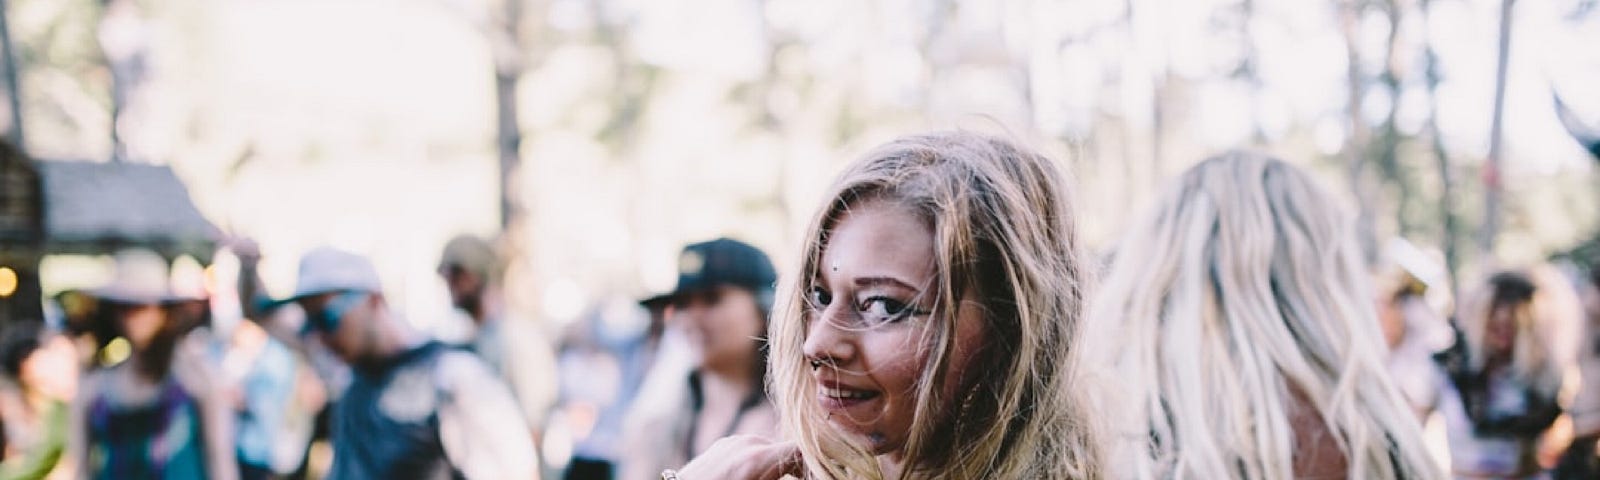 Michael Benza took this photo of a woman at the festival.